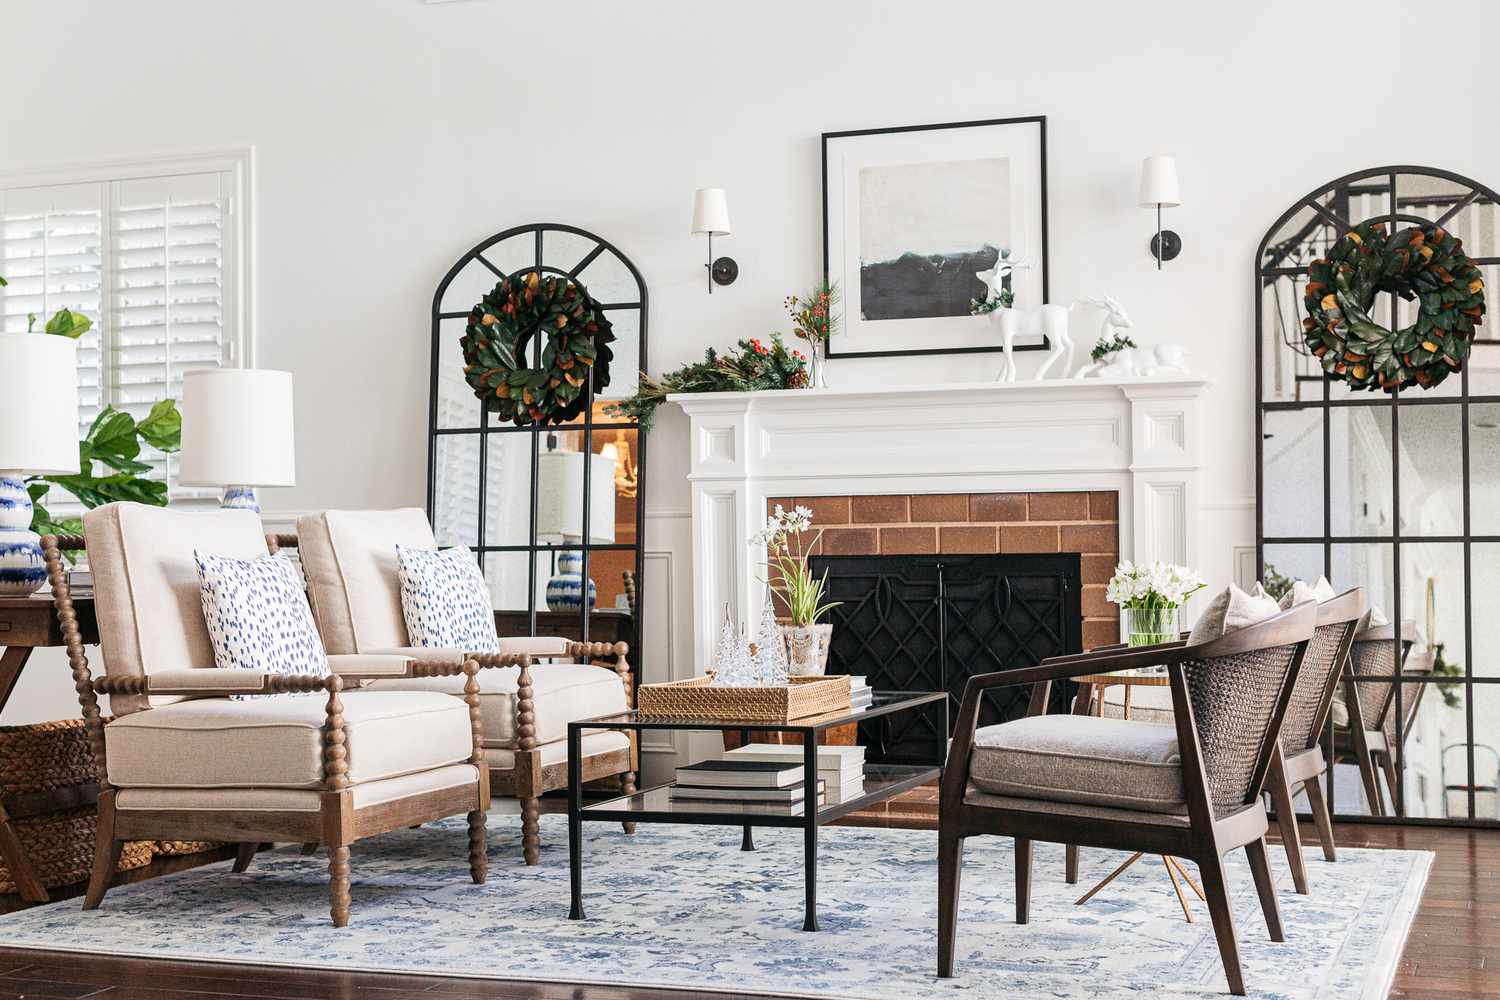 Modern tidy living room with holiday wreaths.